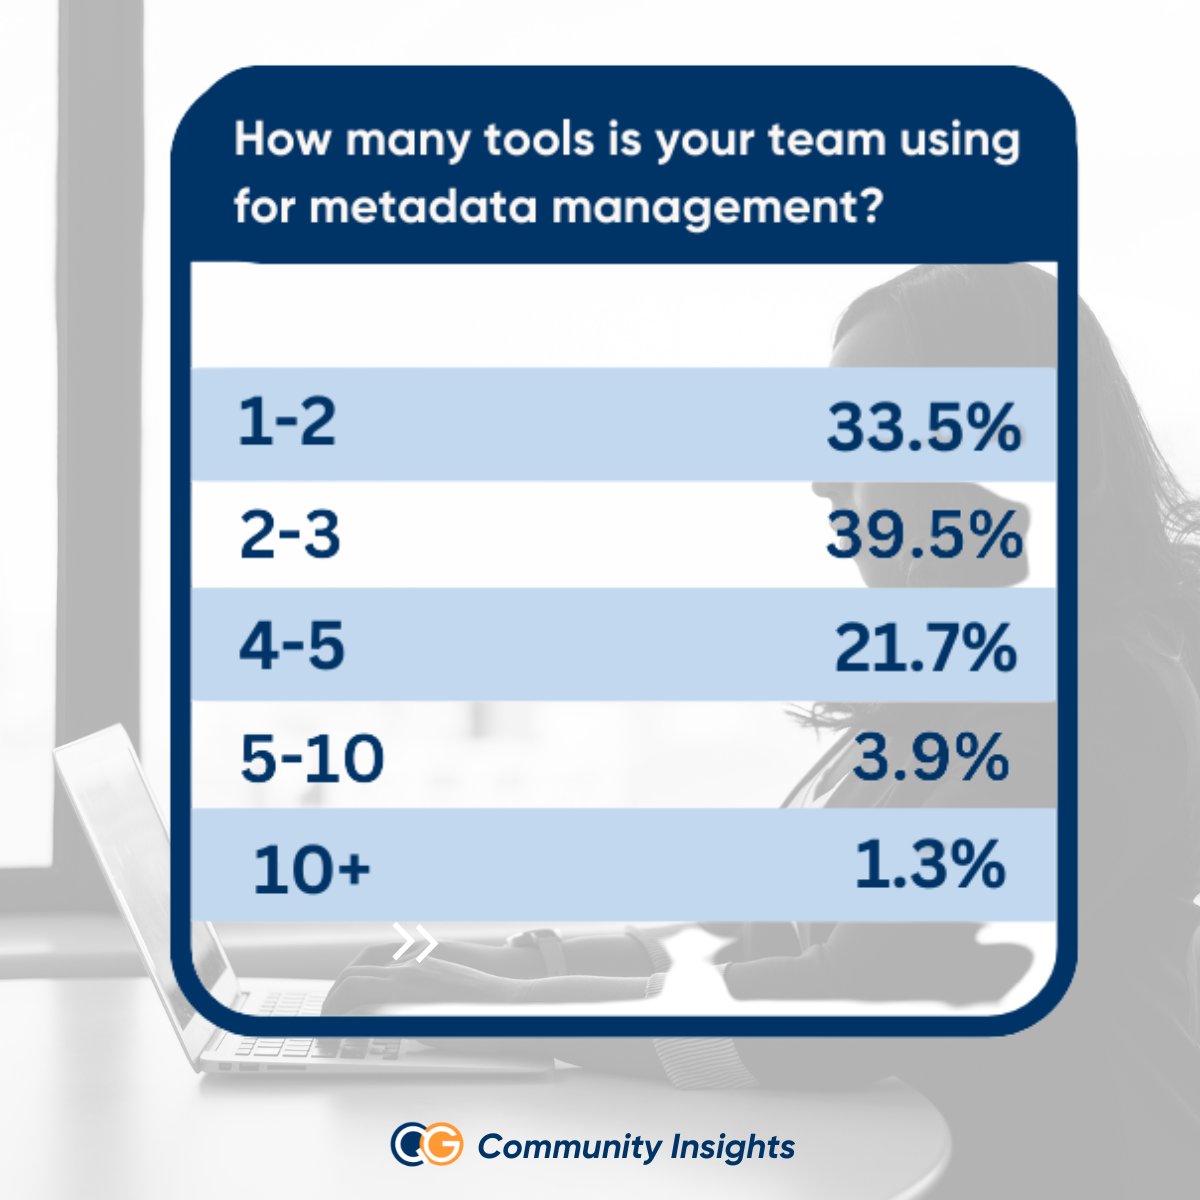 #Metadatamanagement tooling has exploded over recent years. Here are some great stats from a #community survey taken to understand the number of solutions teams are leveraging in the industry!

#datalineage #datacatalog #datateams #dataliteracy #dataquality #dataanalytics